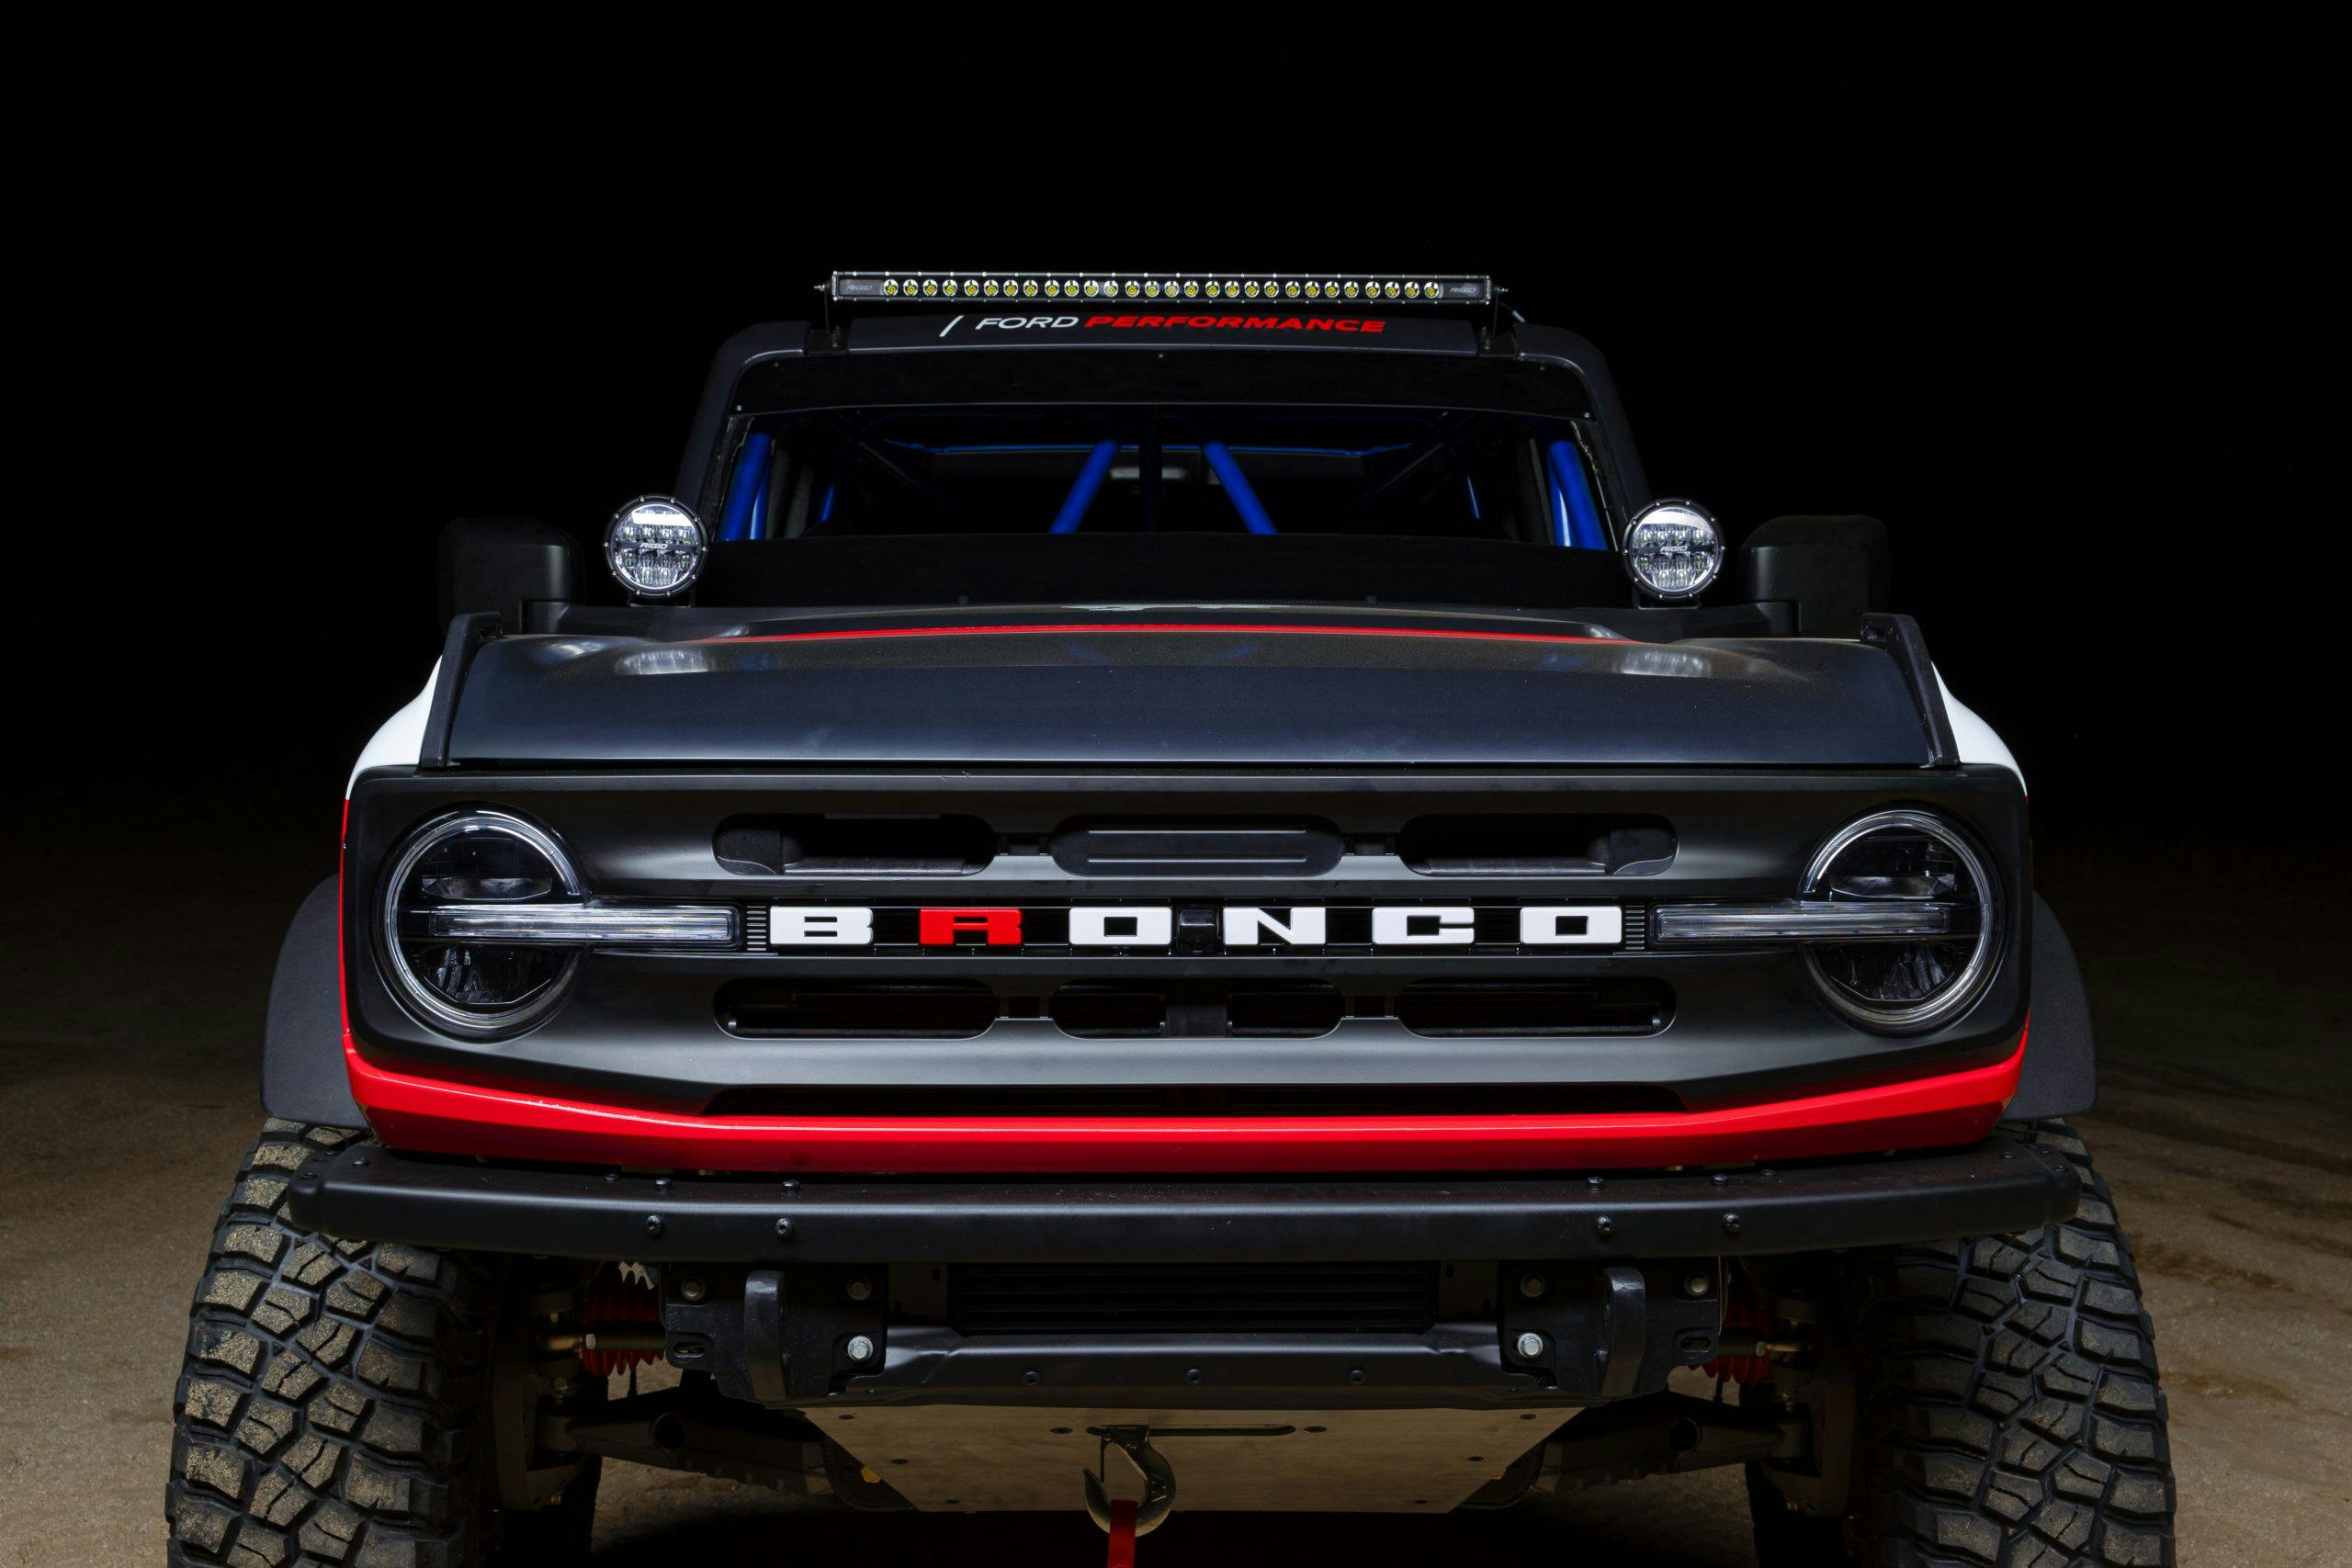 Bronco 4600 grille